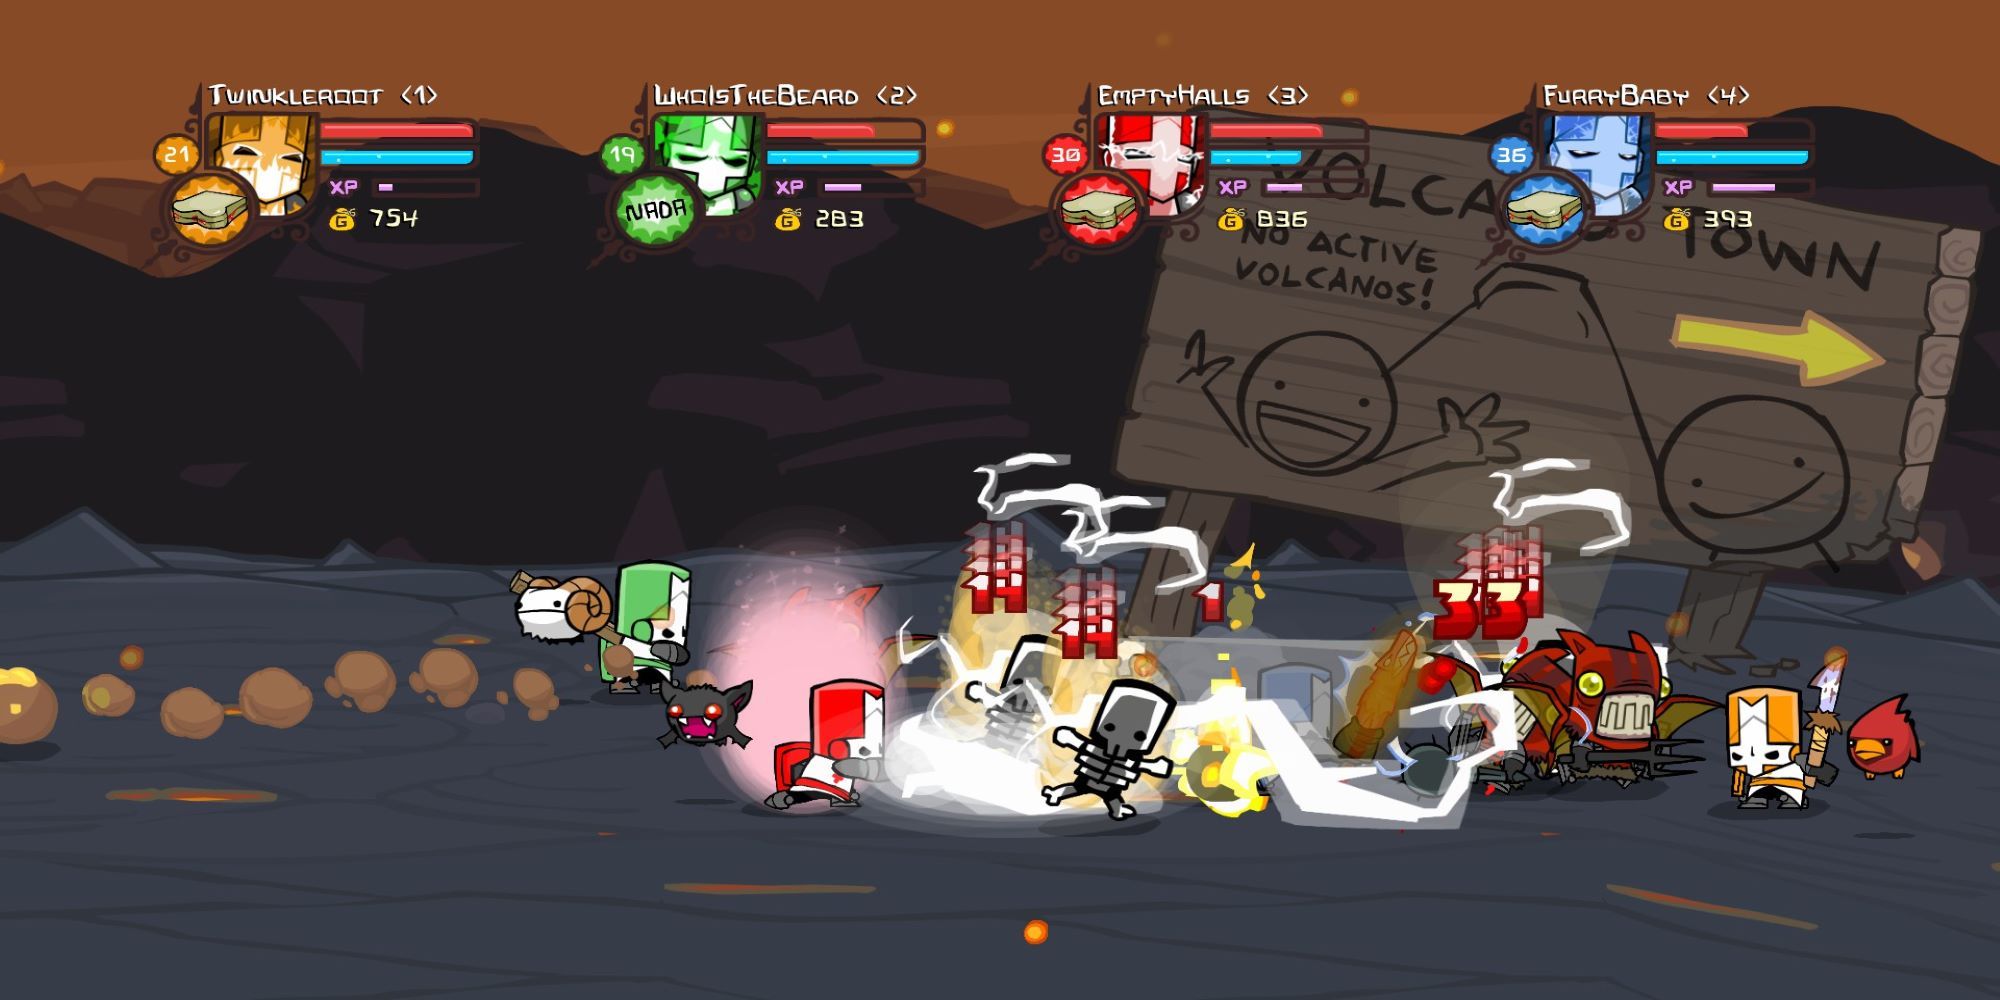 Castle Crashers with the fight against the Elemental Knights